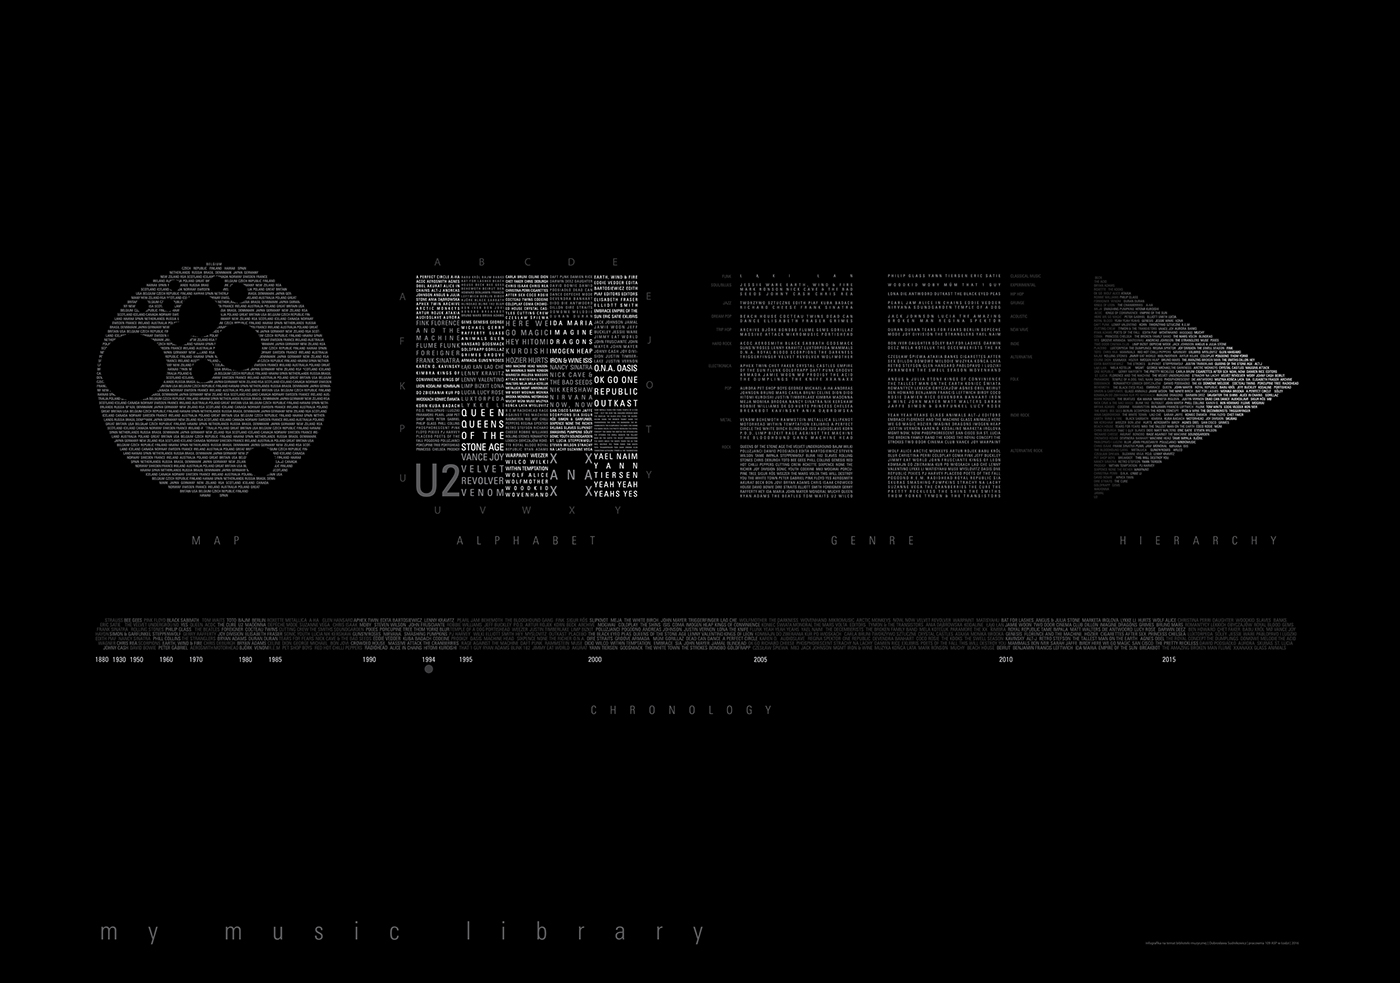 music infographic timeline graphic